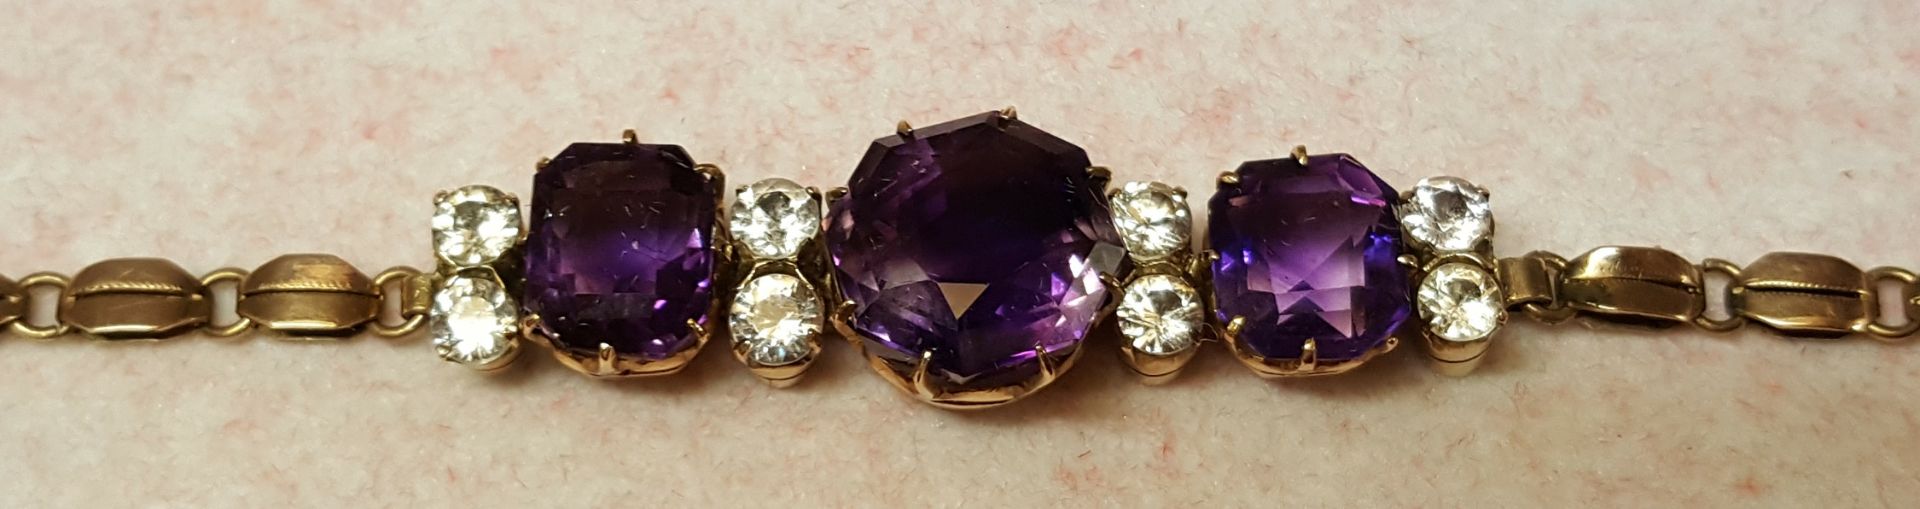 Vintage Yellow Metal, Clear Stone & Amethyst Coloured Stone Bracelet, Pendant & Ring - Image 2 of 2